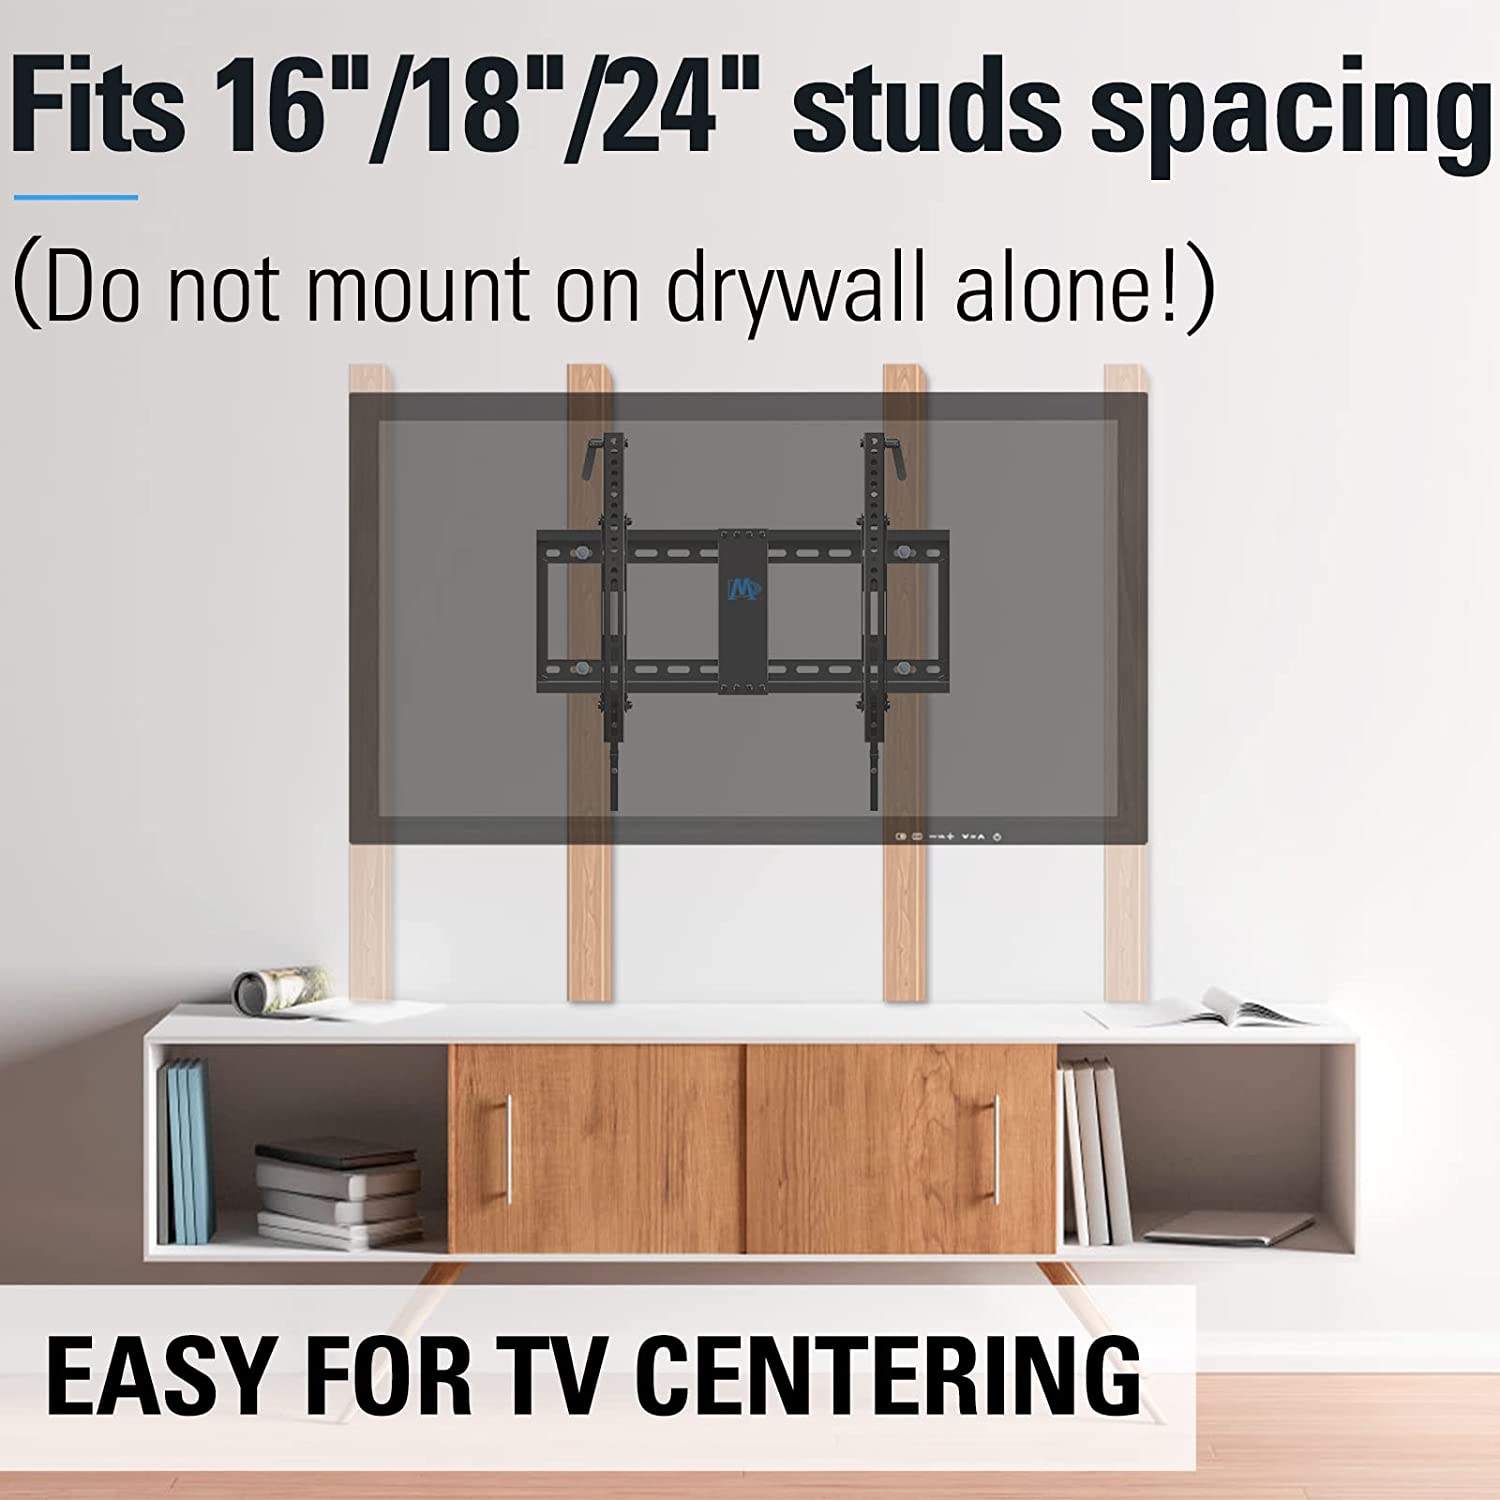 24 Studs MD2165-LK Mounting Dream Tilt TV Wall Mount TV Bracket for Most of 42-70 Inches TV Fits 16 18 TV Mount Tilt up to 20 Degrees with VESA 200x100 to 600x400mm and Loading 132 lbs 